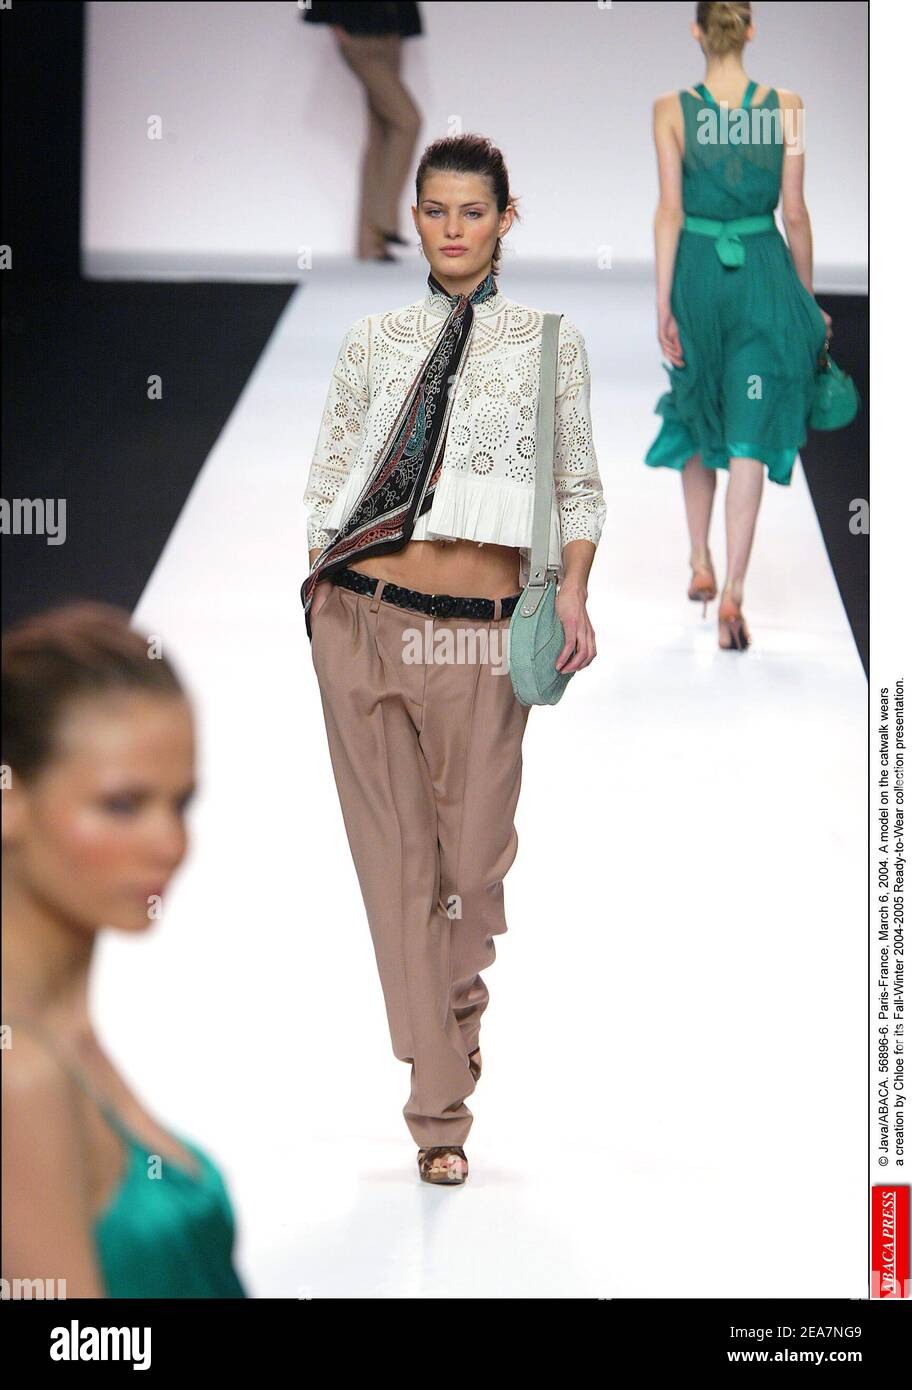 © Java/ABACA. 56896-6. Paris-France, March 6, 2004. A model on the catwalk wears a creation by Chloe for its Fall-Winter 2004-2005 Ready-to-Wear collection presentation. Stock Photo